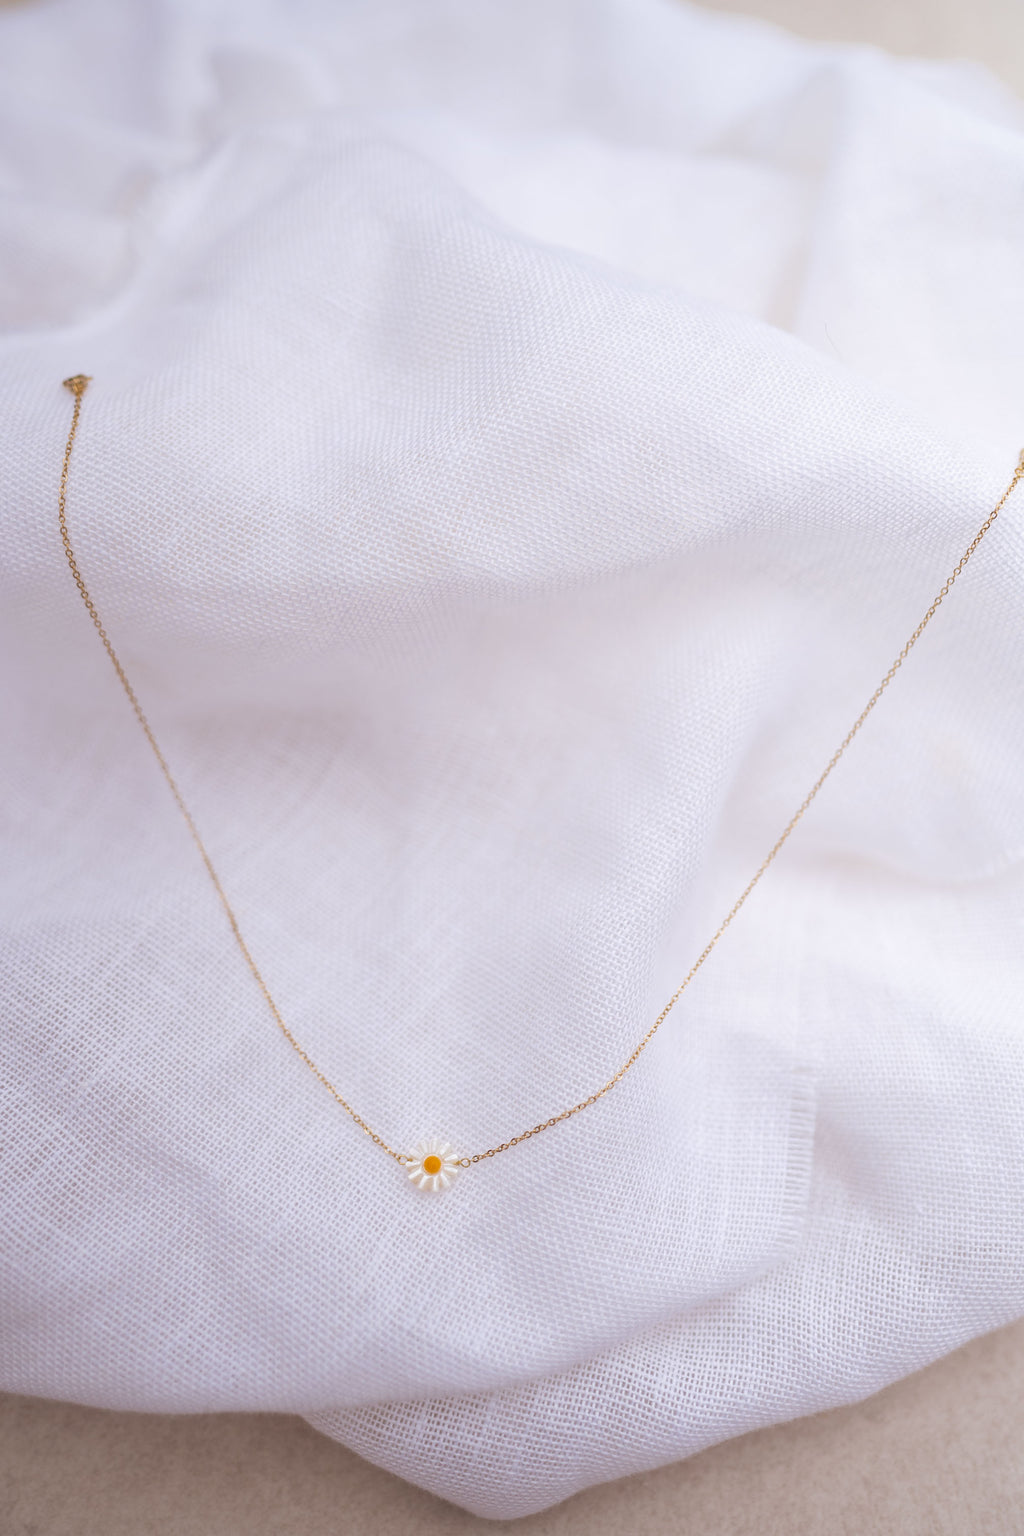 Nory necklace - Golden